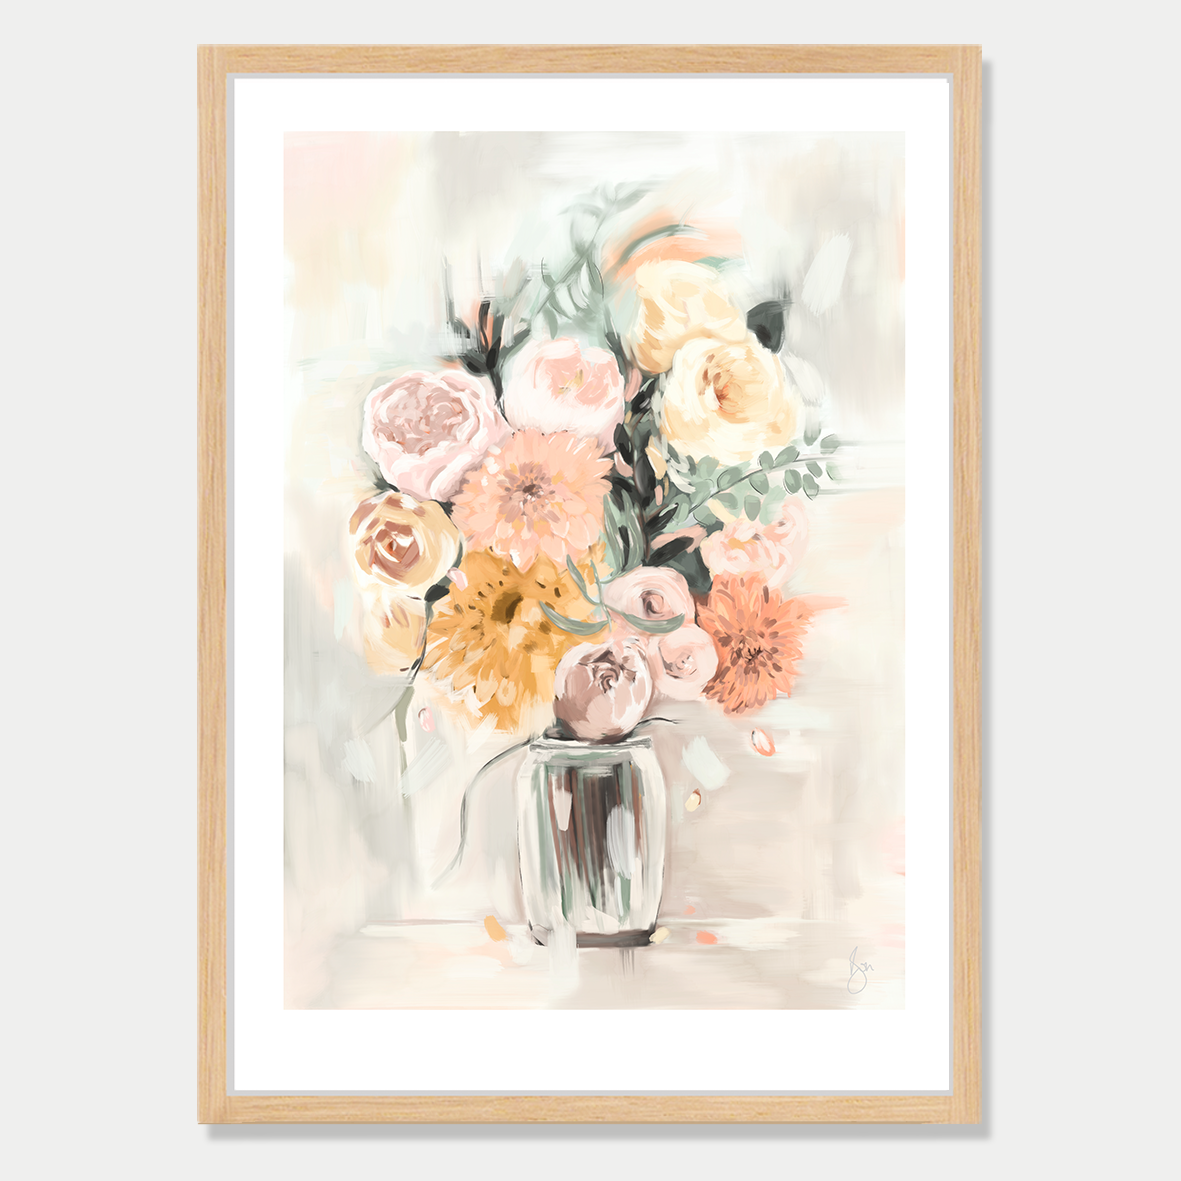 This art print is a still life of a bouquet of flowers in a glass vase, by Bon Jung. Printed in New Zealand by endemicworld and framed in raw oak.